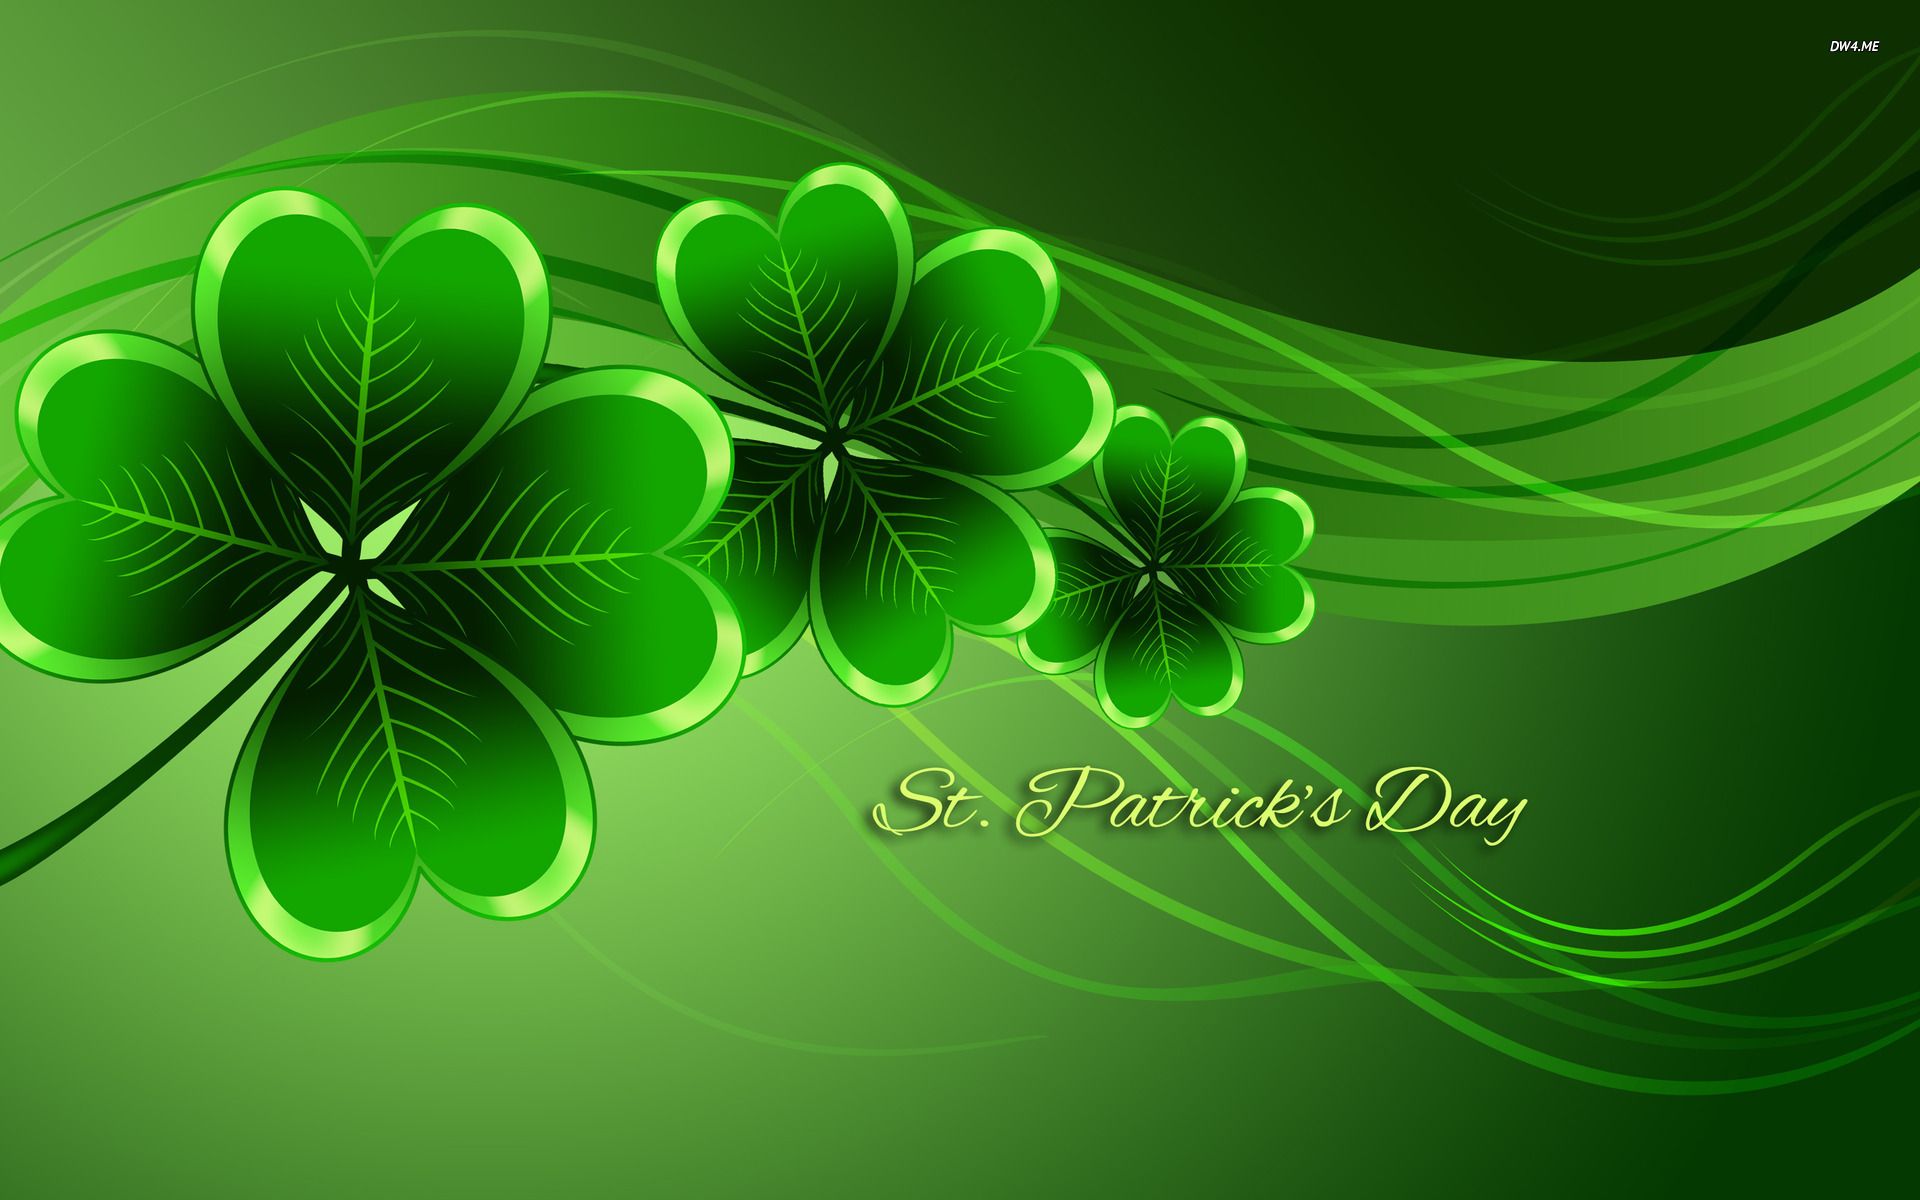 St Patrick Day Background Group Wallpaper House.com